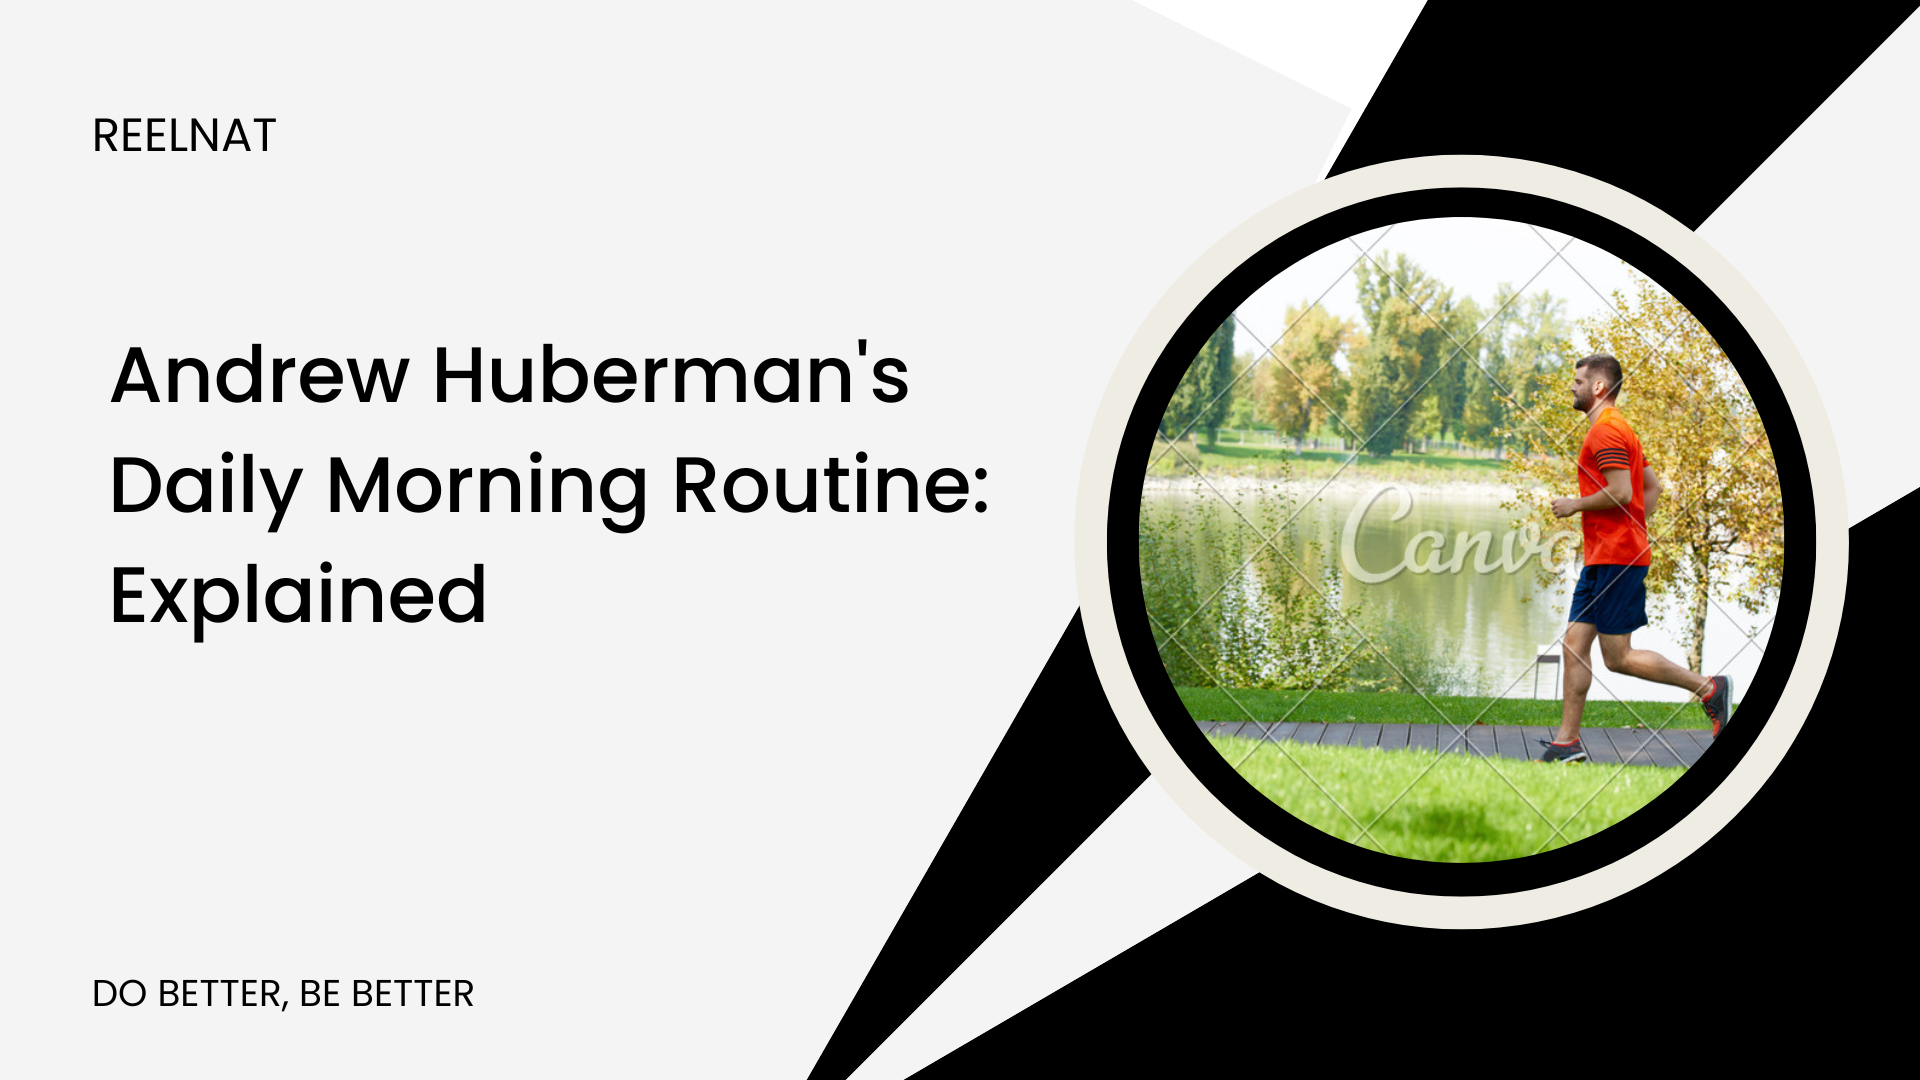 Andrew Huberman’s Daily Morning Routine: Explained